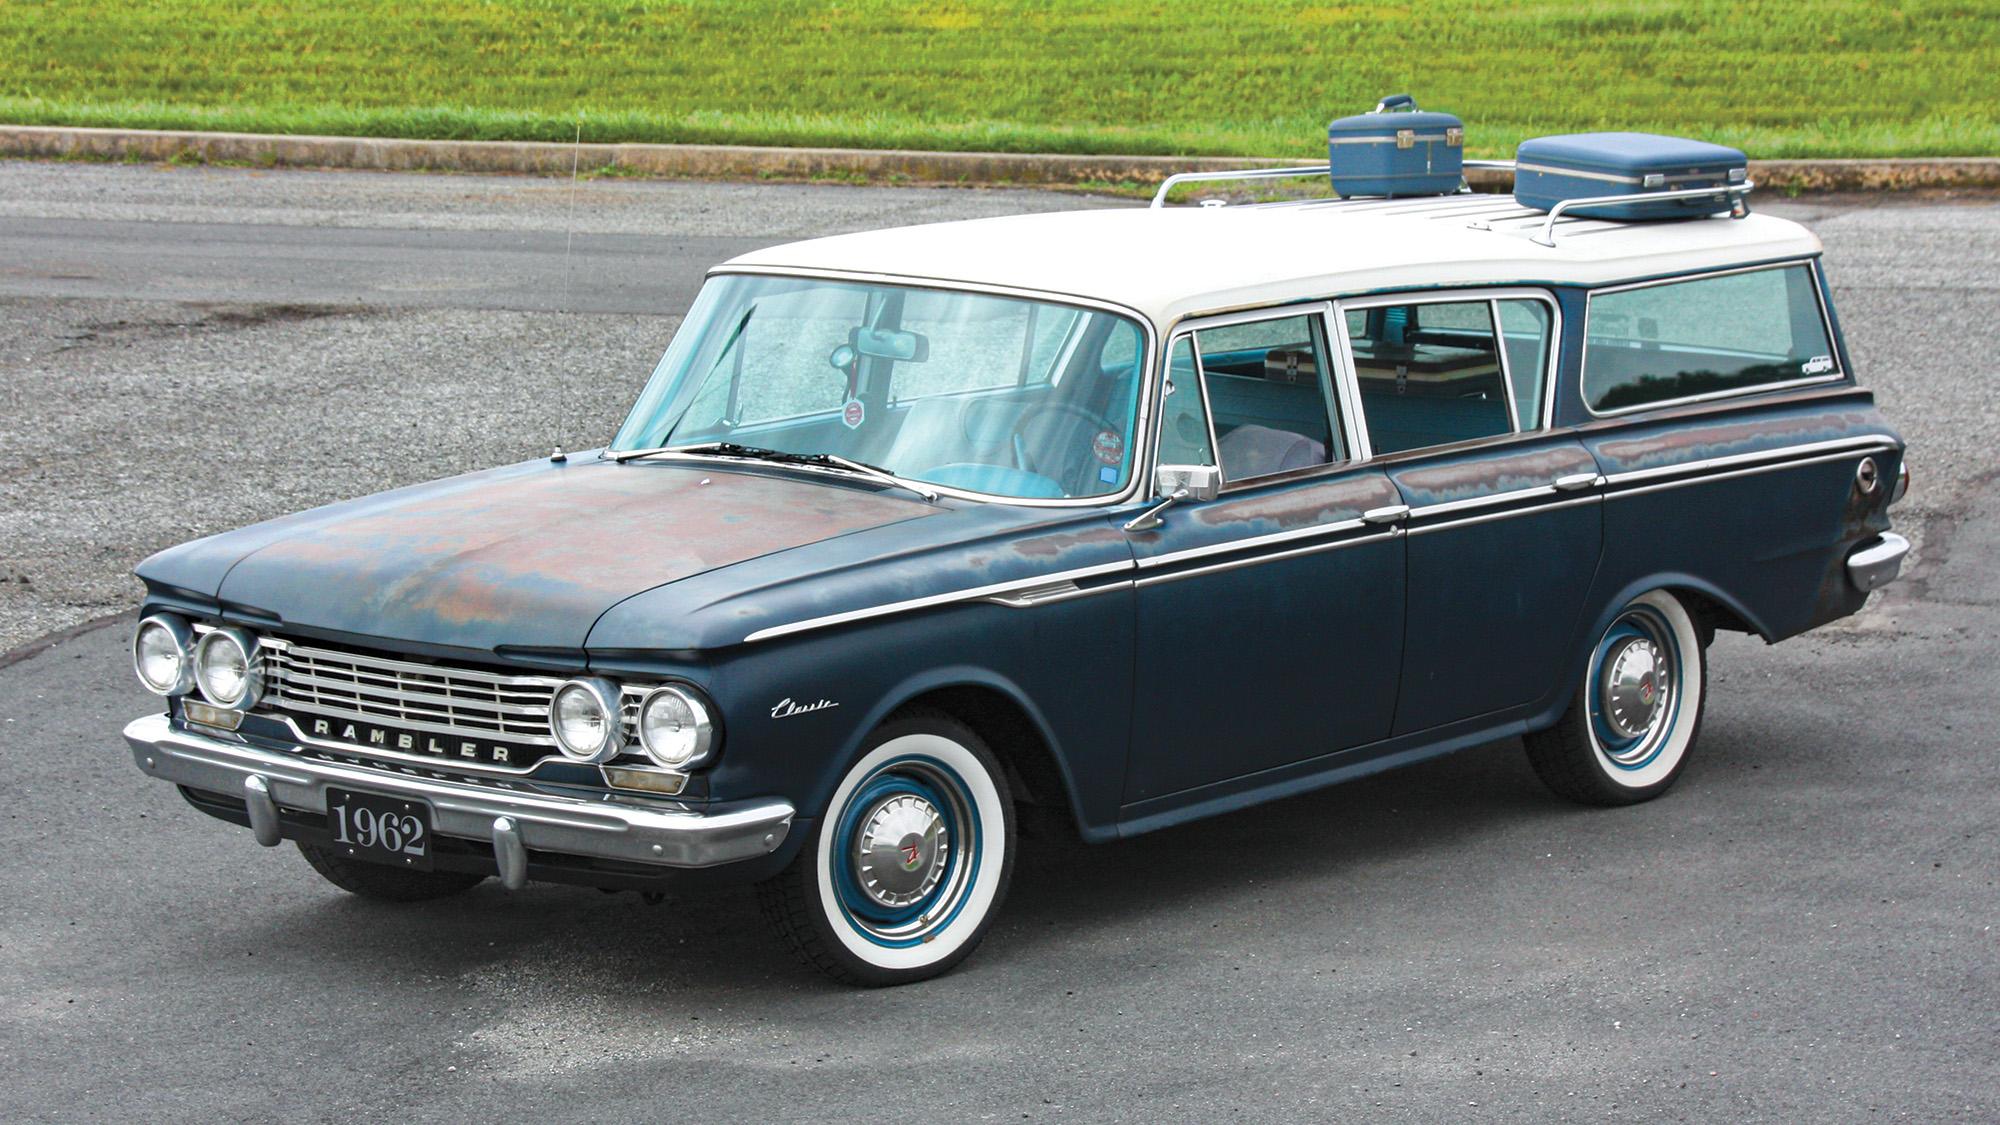 Then and now, this 1962 Rambler Classic Custom Cross Country represents value among station wagons